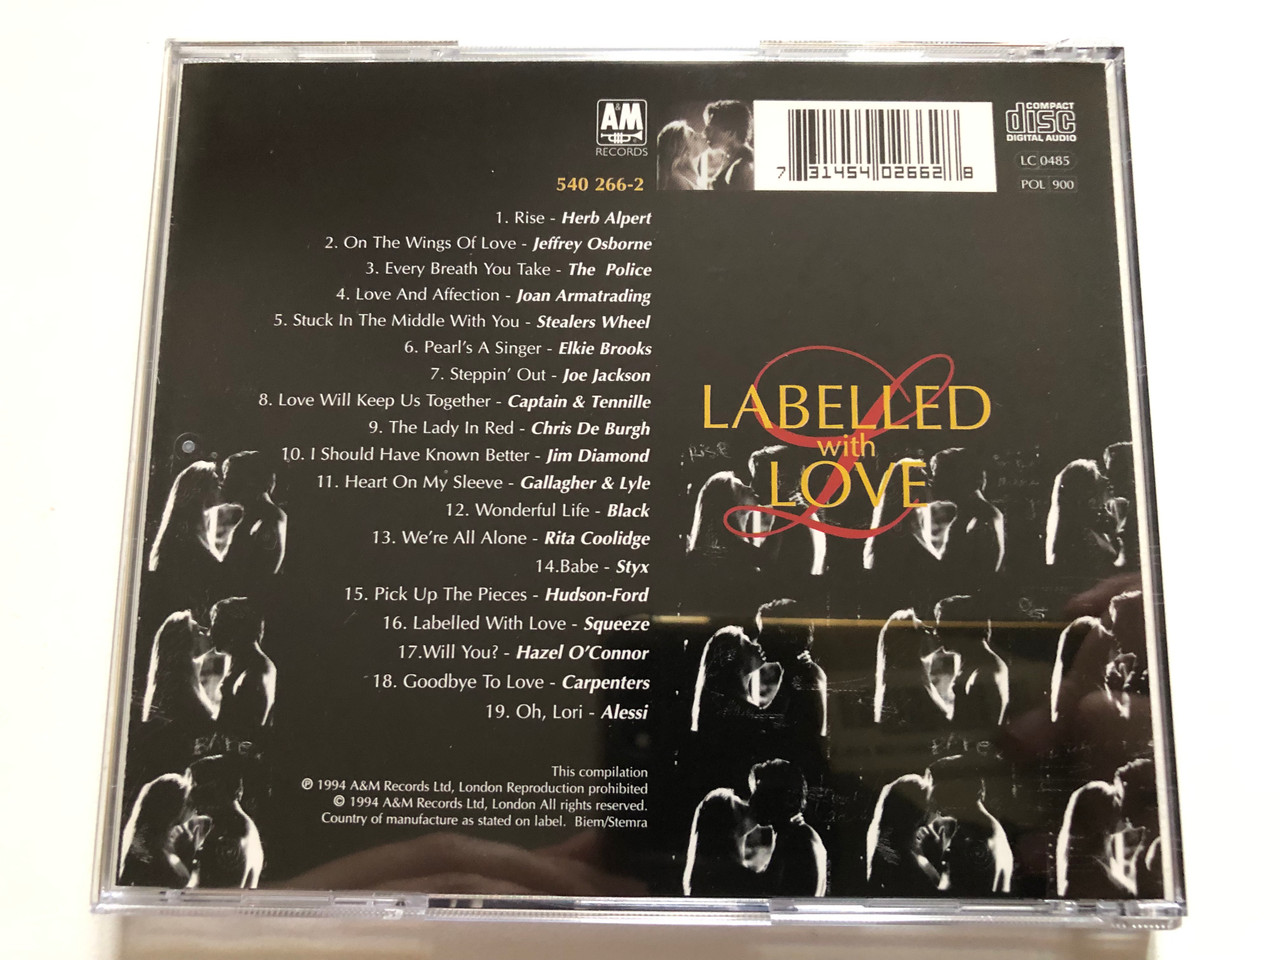 https://cdn10.bigcommerce.com/s-62bdpkt7pb/products/0/images/310539/Labelled_With_Love_-_19_Sensual_Love_Songs_AM_Records_Audio_CD_1994_540_266_2_2__44093.1699382347.1280.1280.JPG?c=2